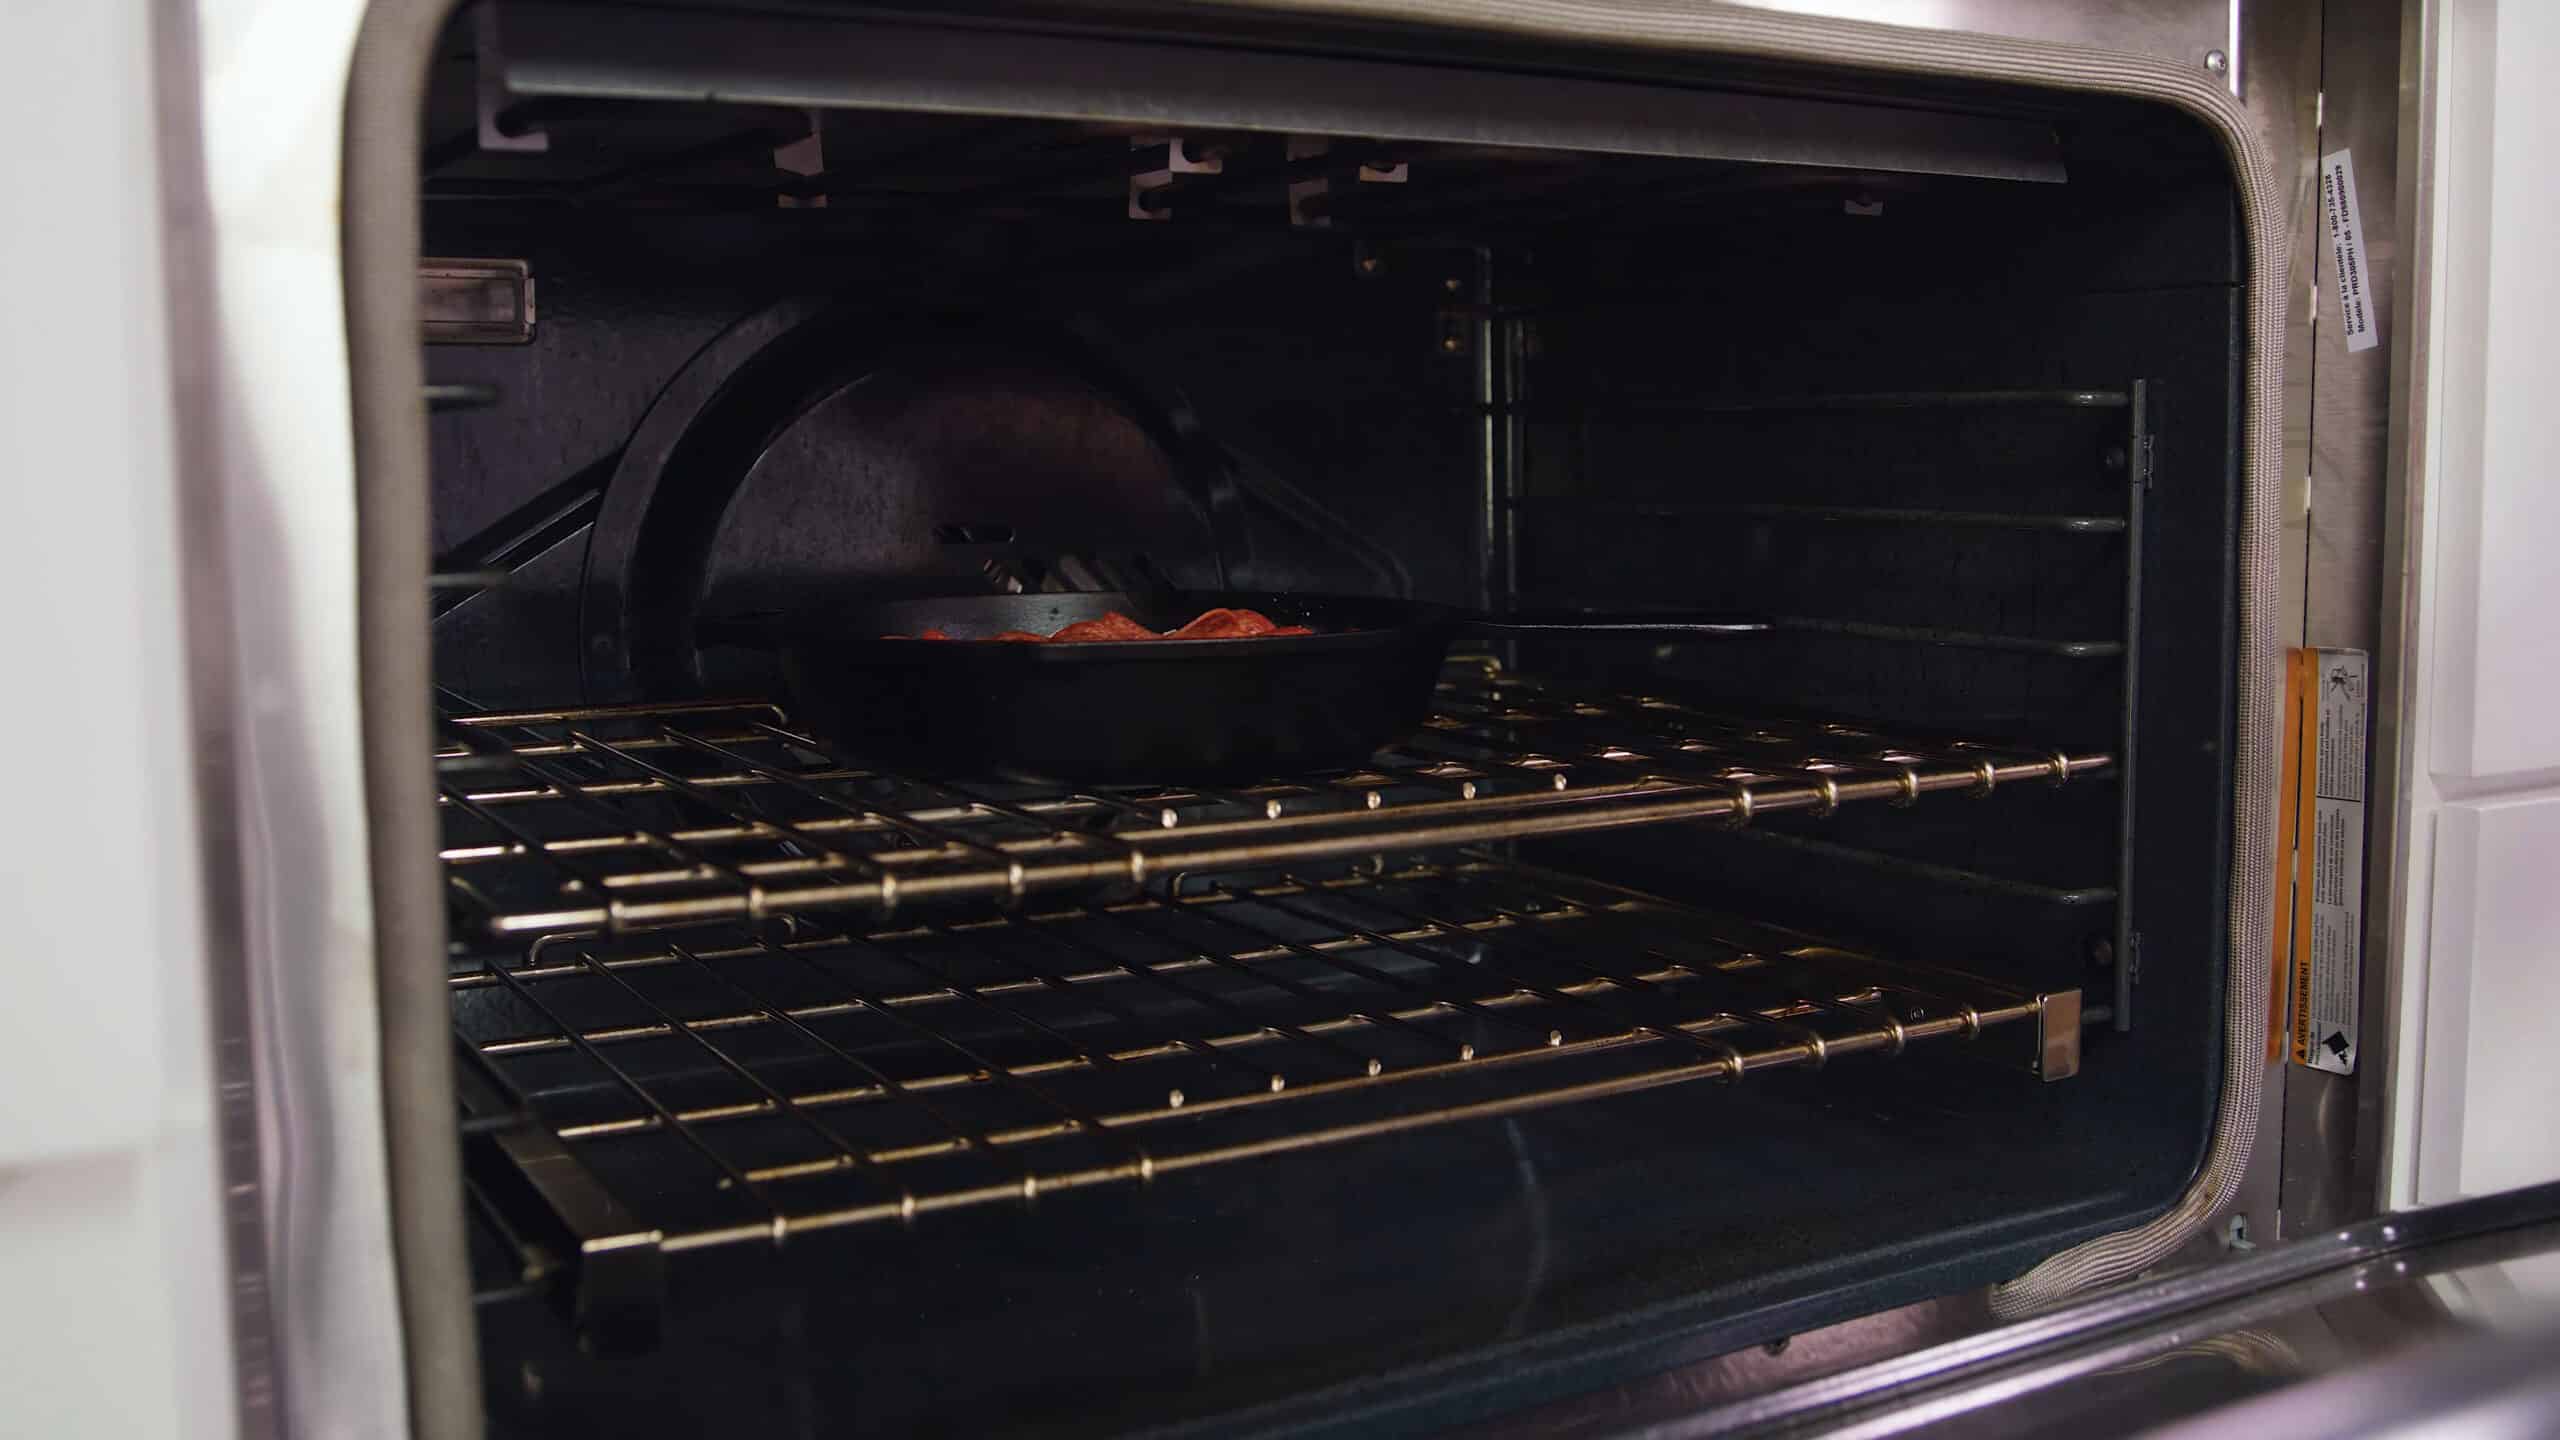 Angled view of an open oven with a cast iron skillet filled with ingredients for pizza dip placed on a metal rack in the middle of the oven.